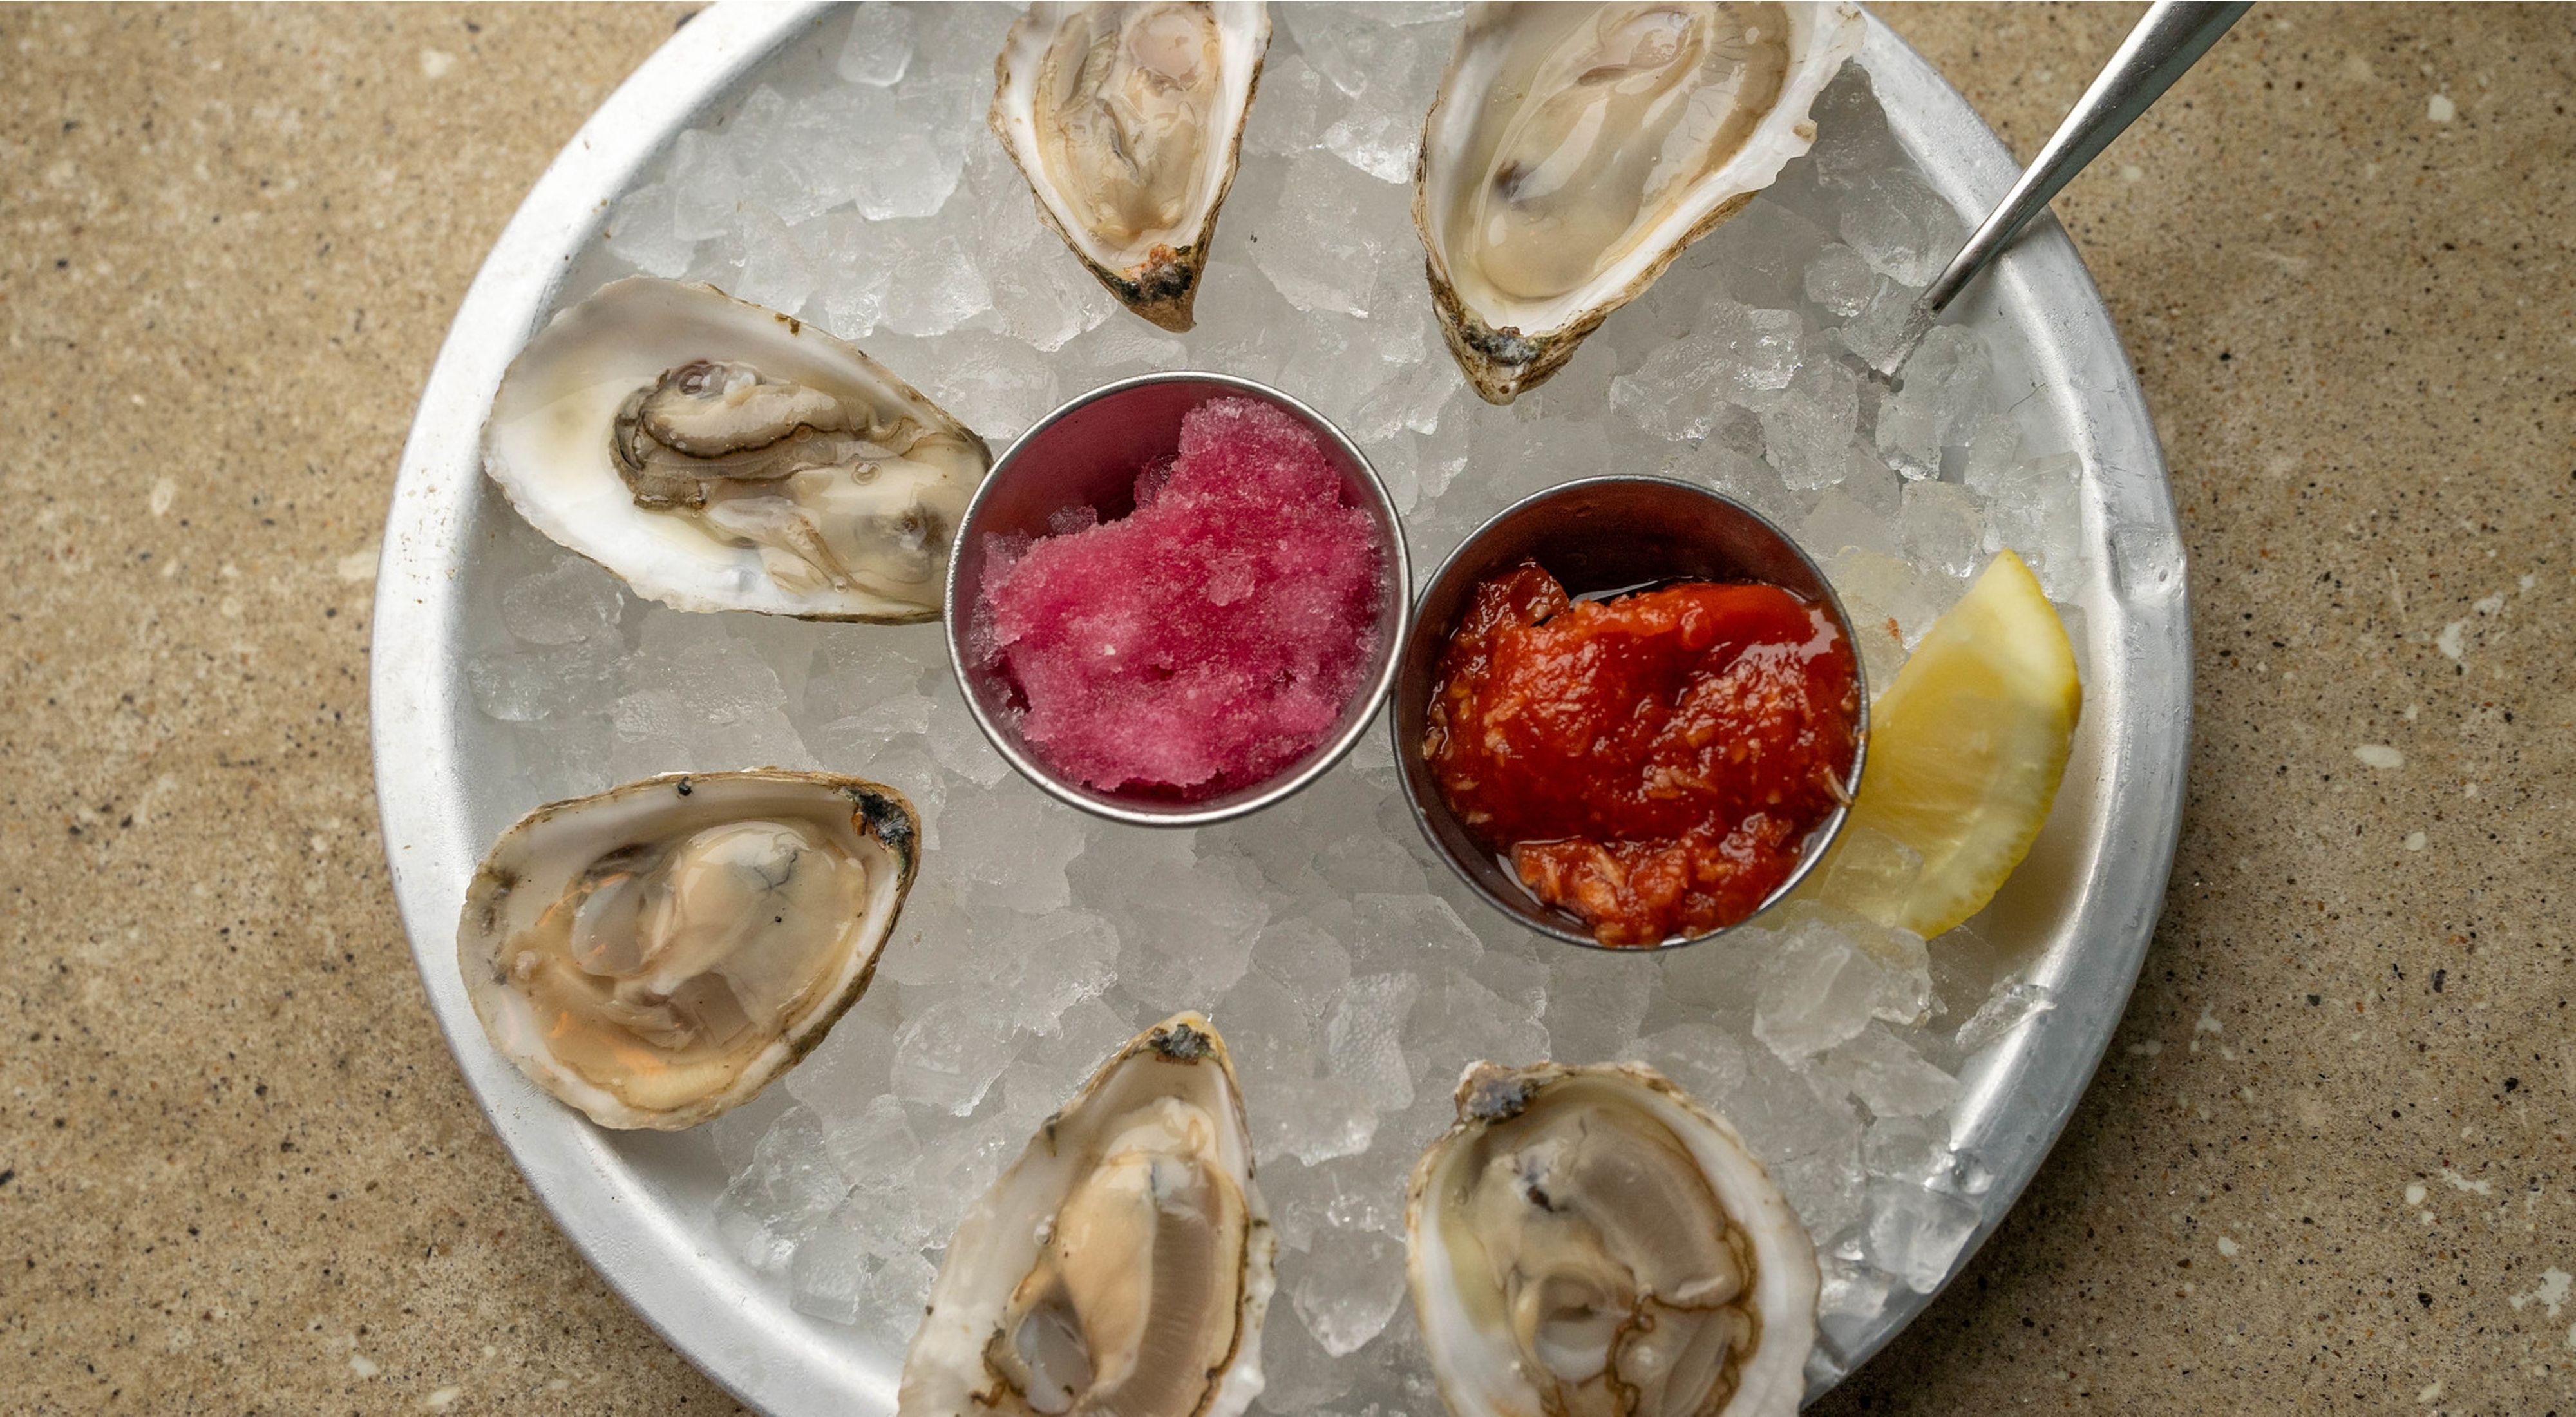 A plate of six oysters on ice, with a lemon wedge and a small container of hot sauce.